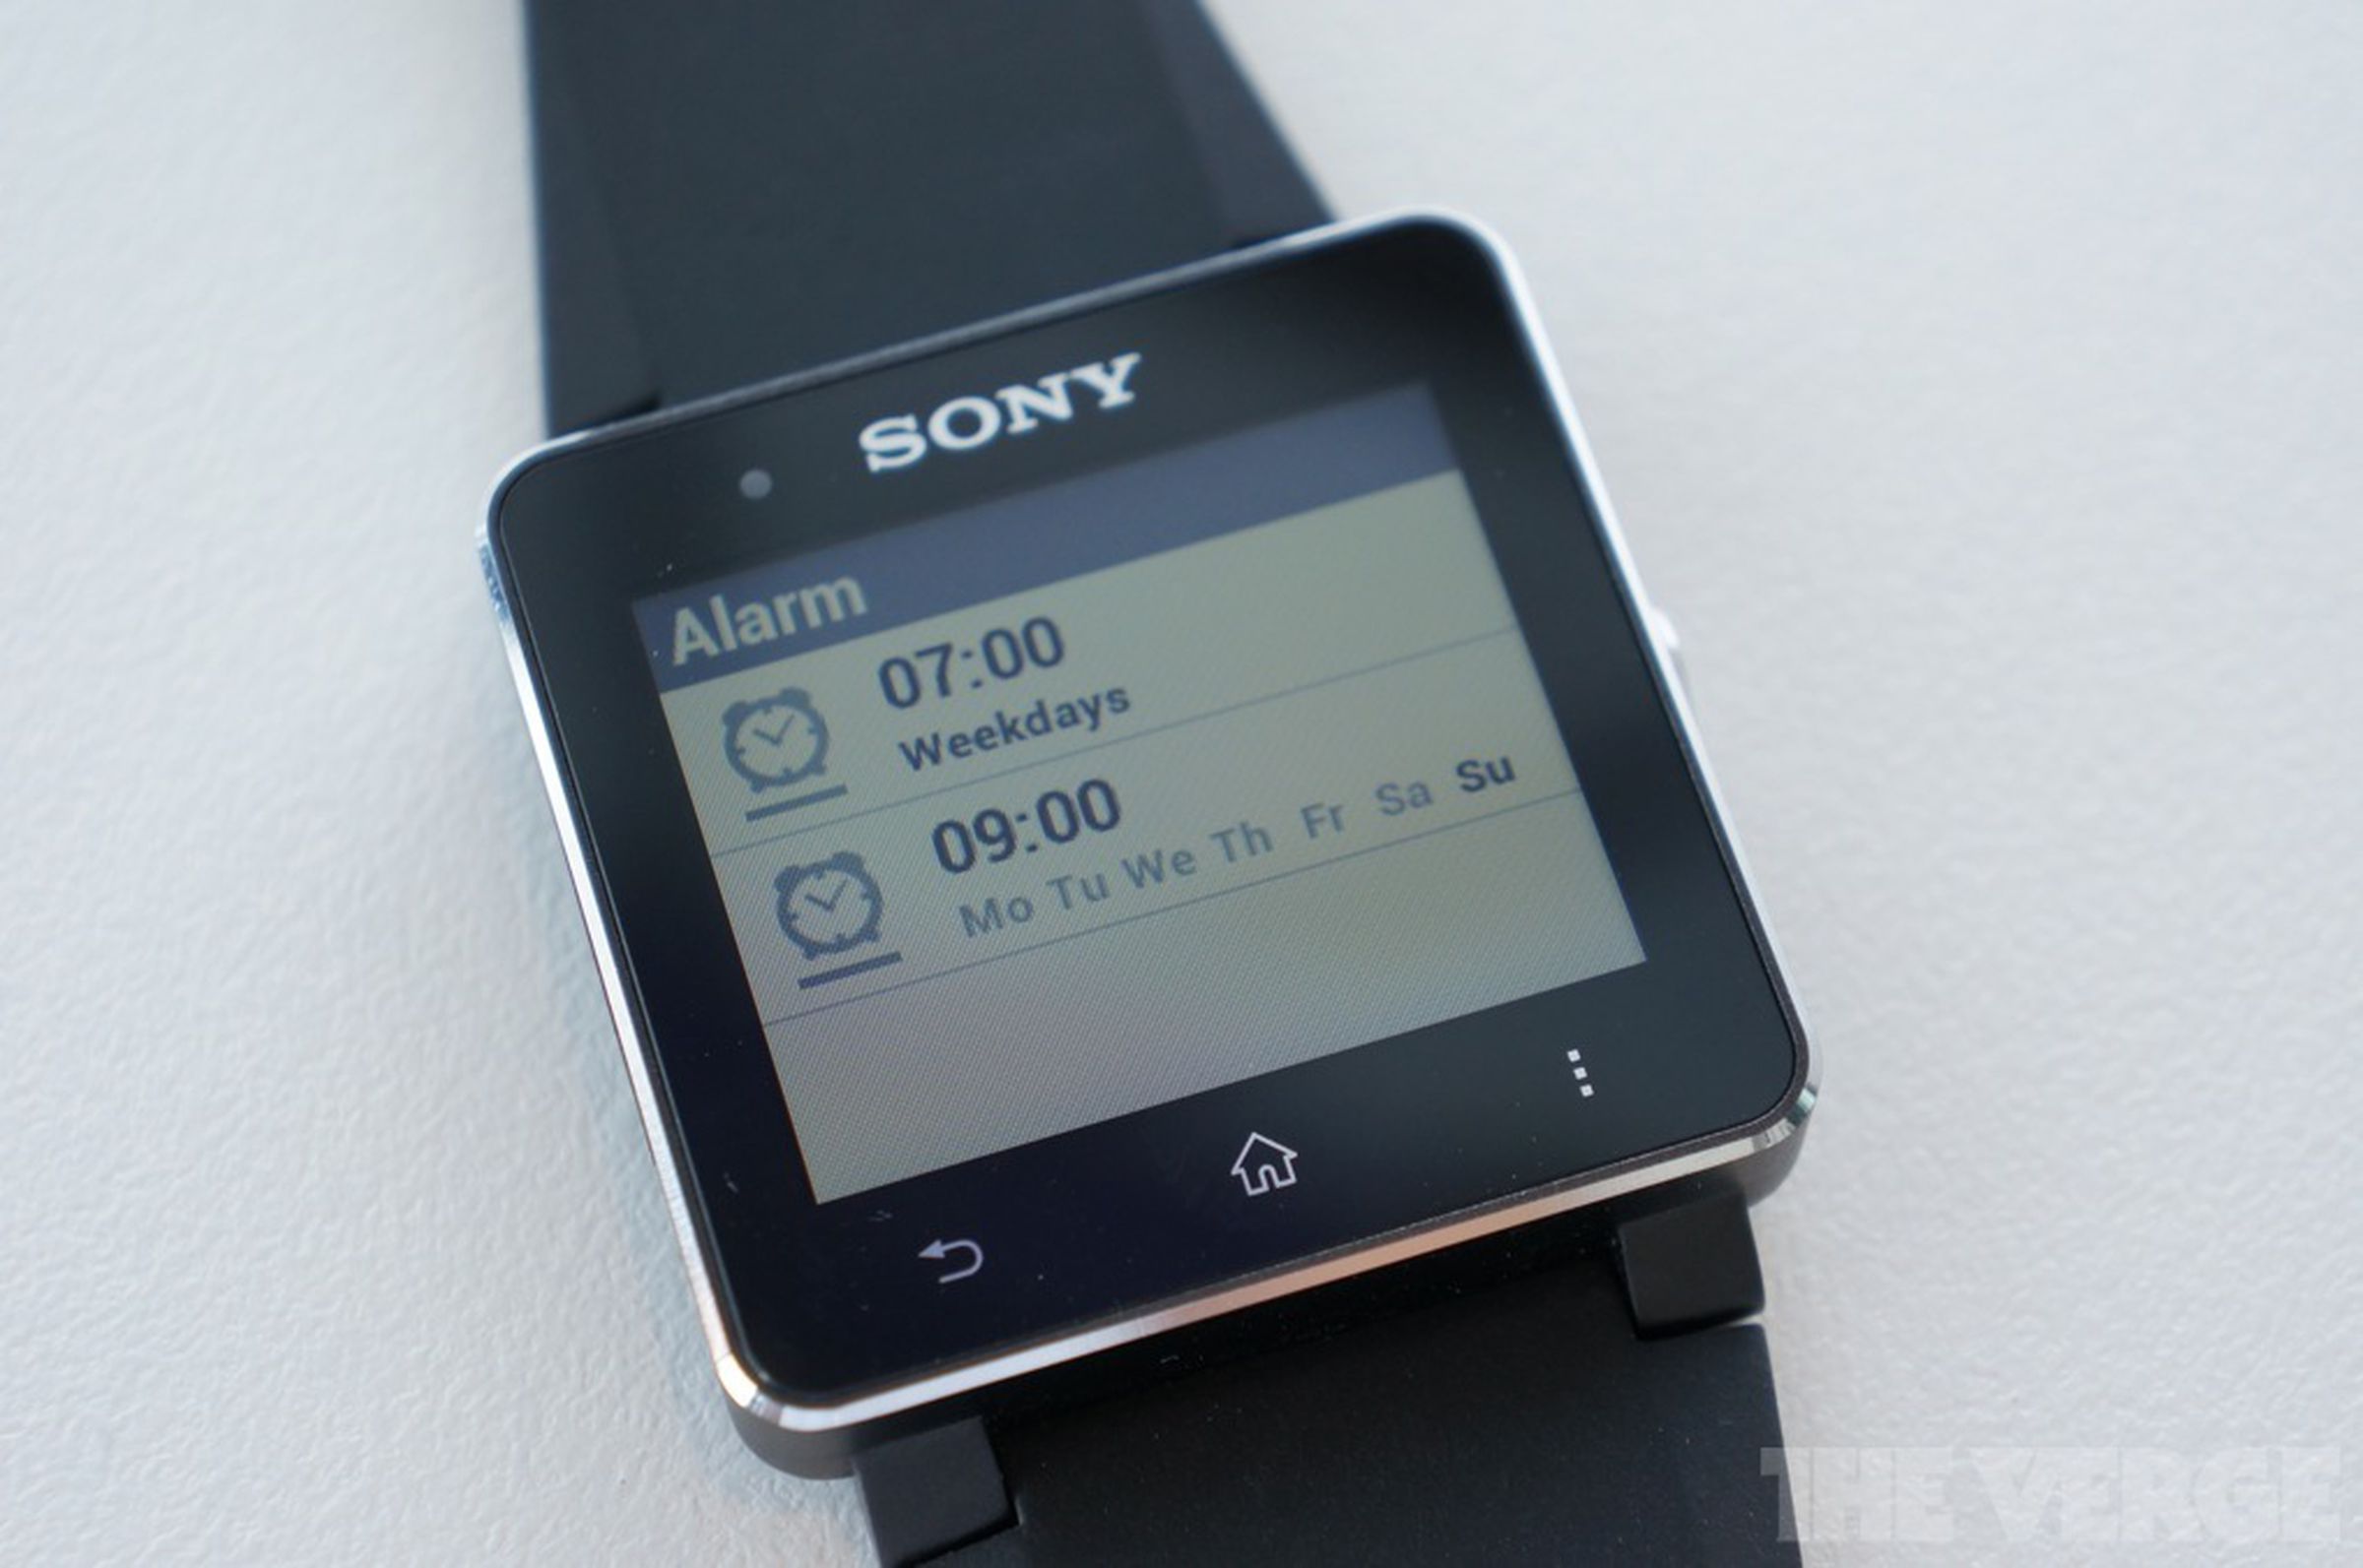 Sony SmartWatch 2 hands-on gallery